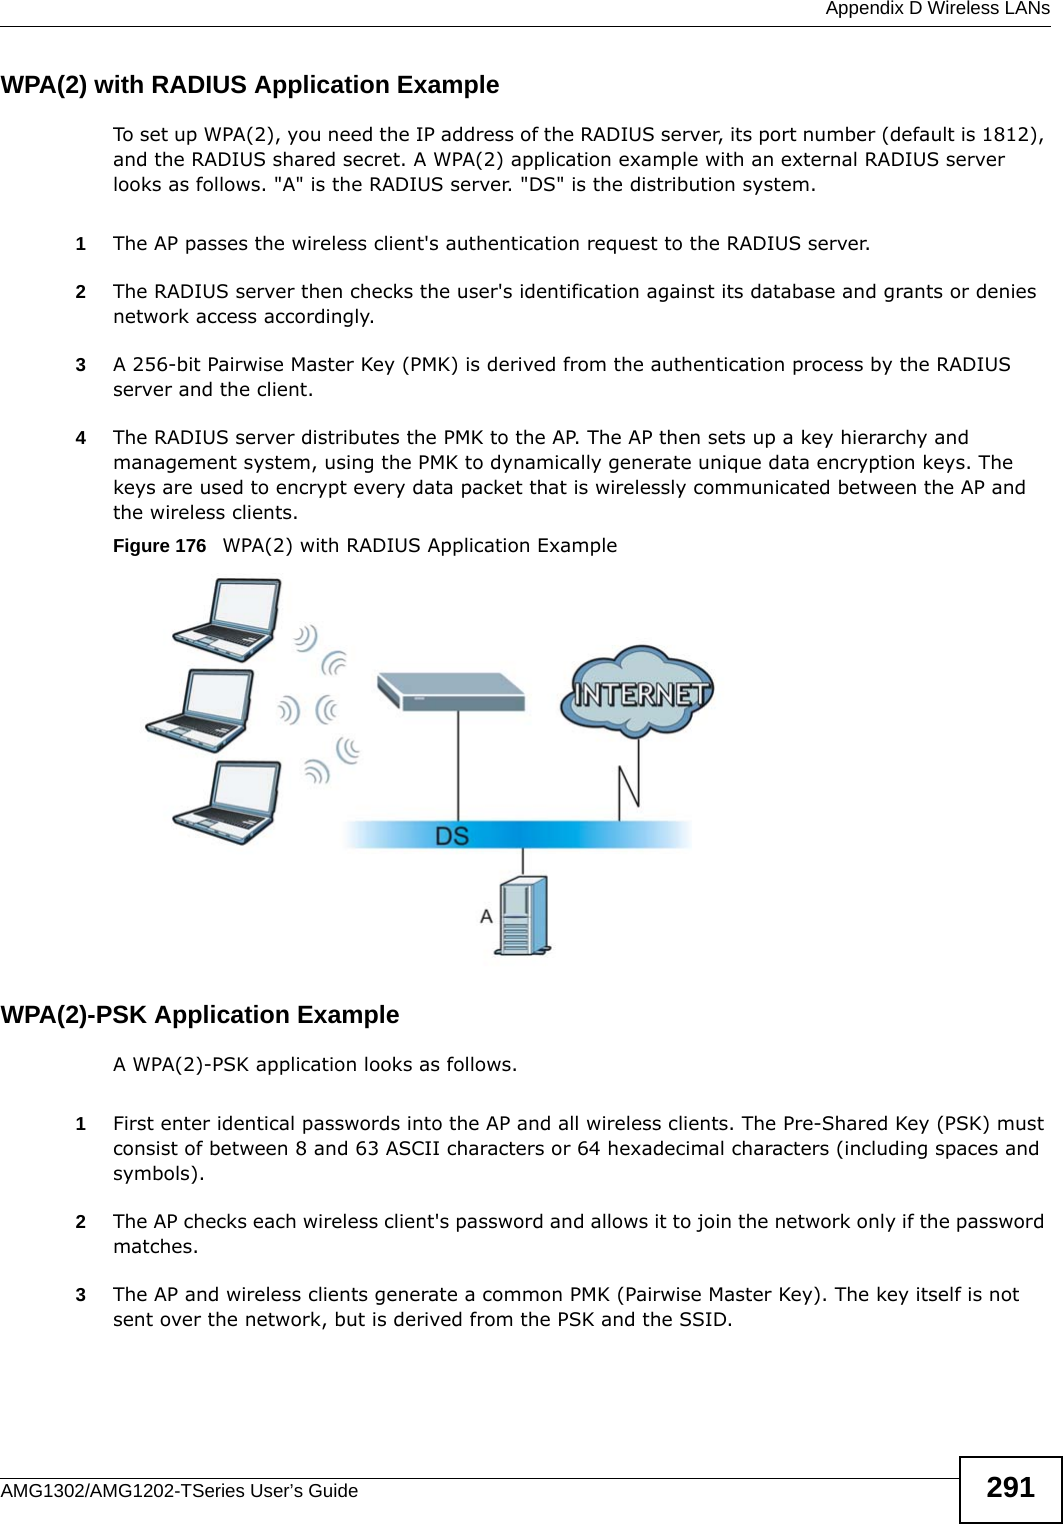  Appendix D Wireless LANsAMG1302/AMG1202-TSeries User’s Guide 291WPA(2) with RADIUS Application ExampleTo set up WPA(2), you need the IP address of the RADIUS server, its port number (default is 1812), and the RADIUS shared secret. A WPA(2) application example with an external RADIUS server looks as follows. &quot;A&quot; is the RADIUS server. &quot;DS&quot; is the distribution system.1The AP passes the wireless client&apos;s authentication request to the RADIUS server.2The RADIUS server then checks the user&apos;s identification against its database and grants or denies network access accordingly.3A 256-bit Pairwise Master Key (PMK) is derived from the authentication process by the RADIUS server and the client.4The RADIUS server distributes the PMK to the AP. The AP then sets up a key hierarchy and management system, using the PMK to dynamically generate unique data encryption keys. The keys are used to encrypt every data packet that is wirelessly communicated between the AP and the wireless clients.Figure 176   WPA(2) with RADIUS Application ExampleWPA(2)-PSK Application ExampleA WPA(2)-PSK application looks as follows.1First enter identical passwords into the AP and all wireless clients. The Pre-Shared Key (PSK) must consist of between 8 and 63 ASCII characters or 64 hexadecimal characters (including spaces and symbols).2The AP checks each wireless client&apos;s password and allows it to join the network only if the password matches.3The AP and wireless clients generate a common PMK (Pairwise Master Key). The key itself is not sent over the network, but is derived from the PSK and the SSID. 